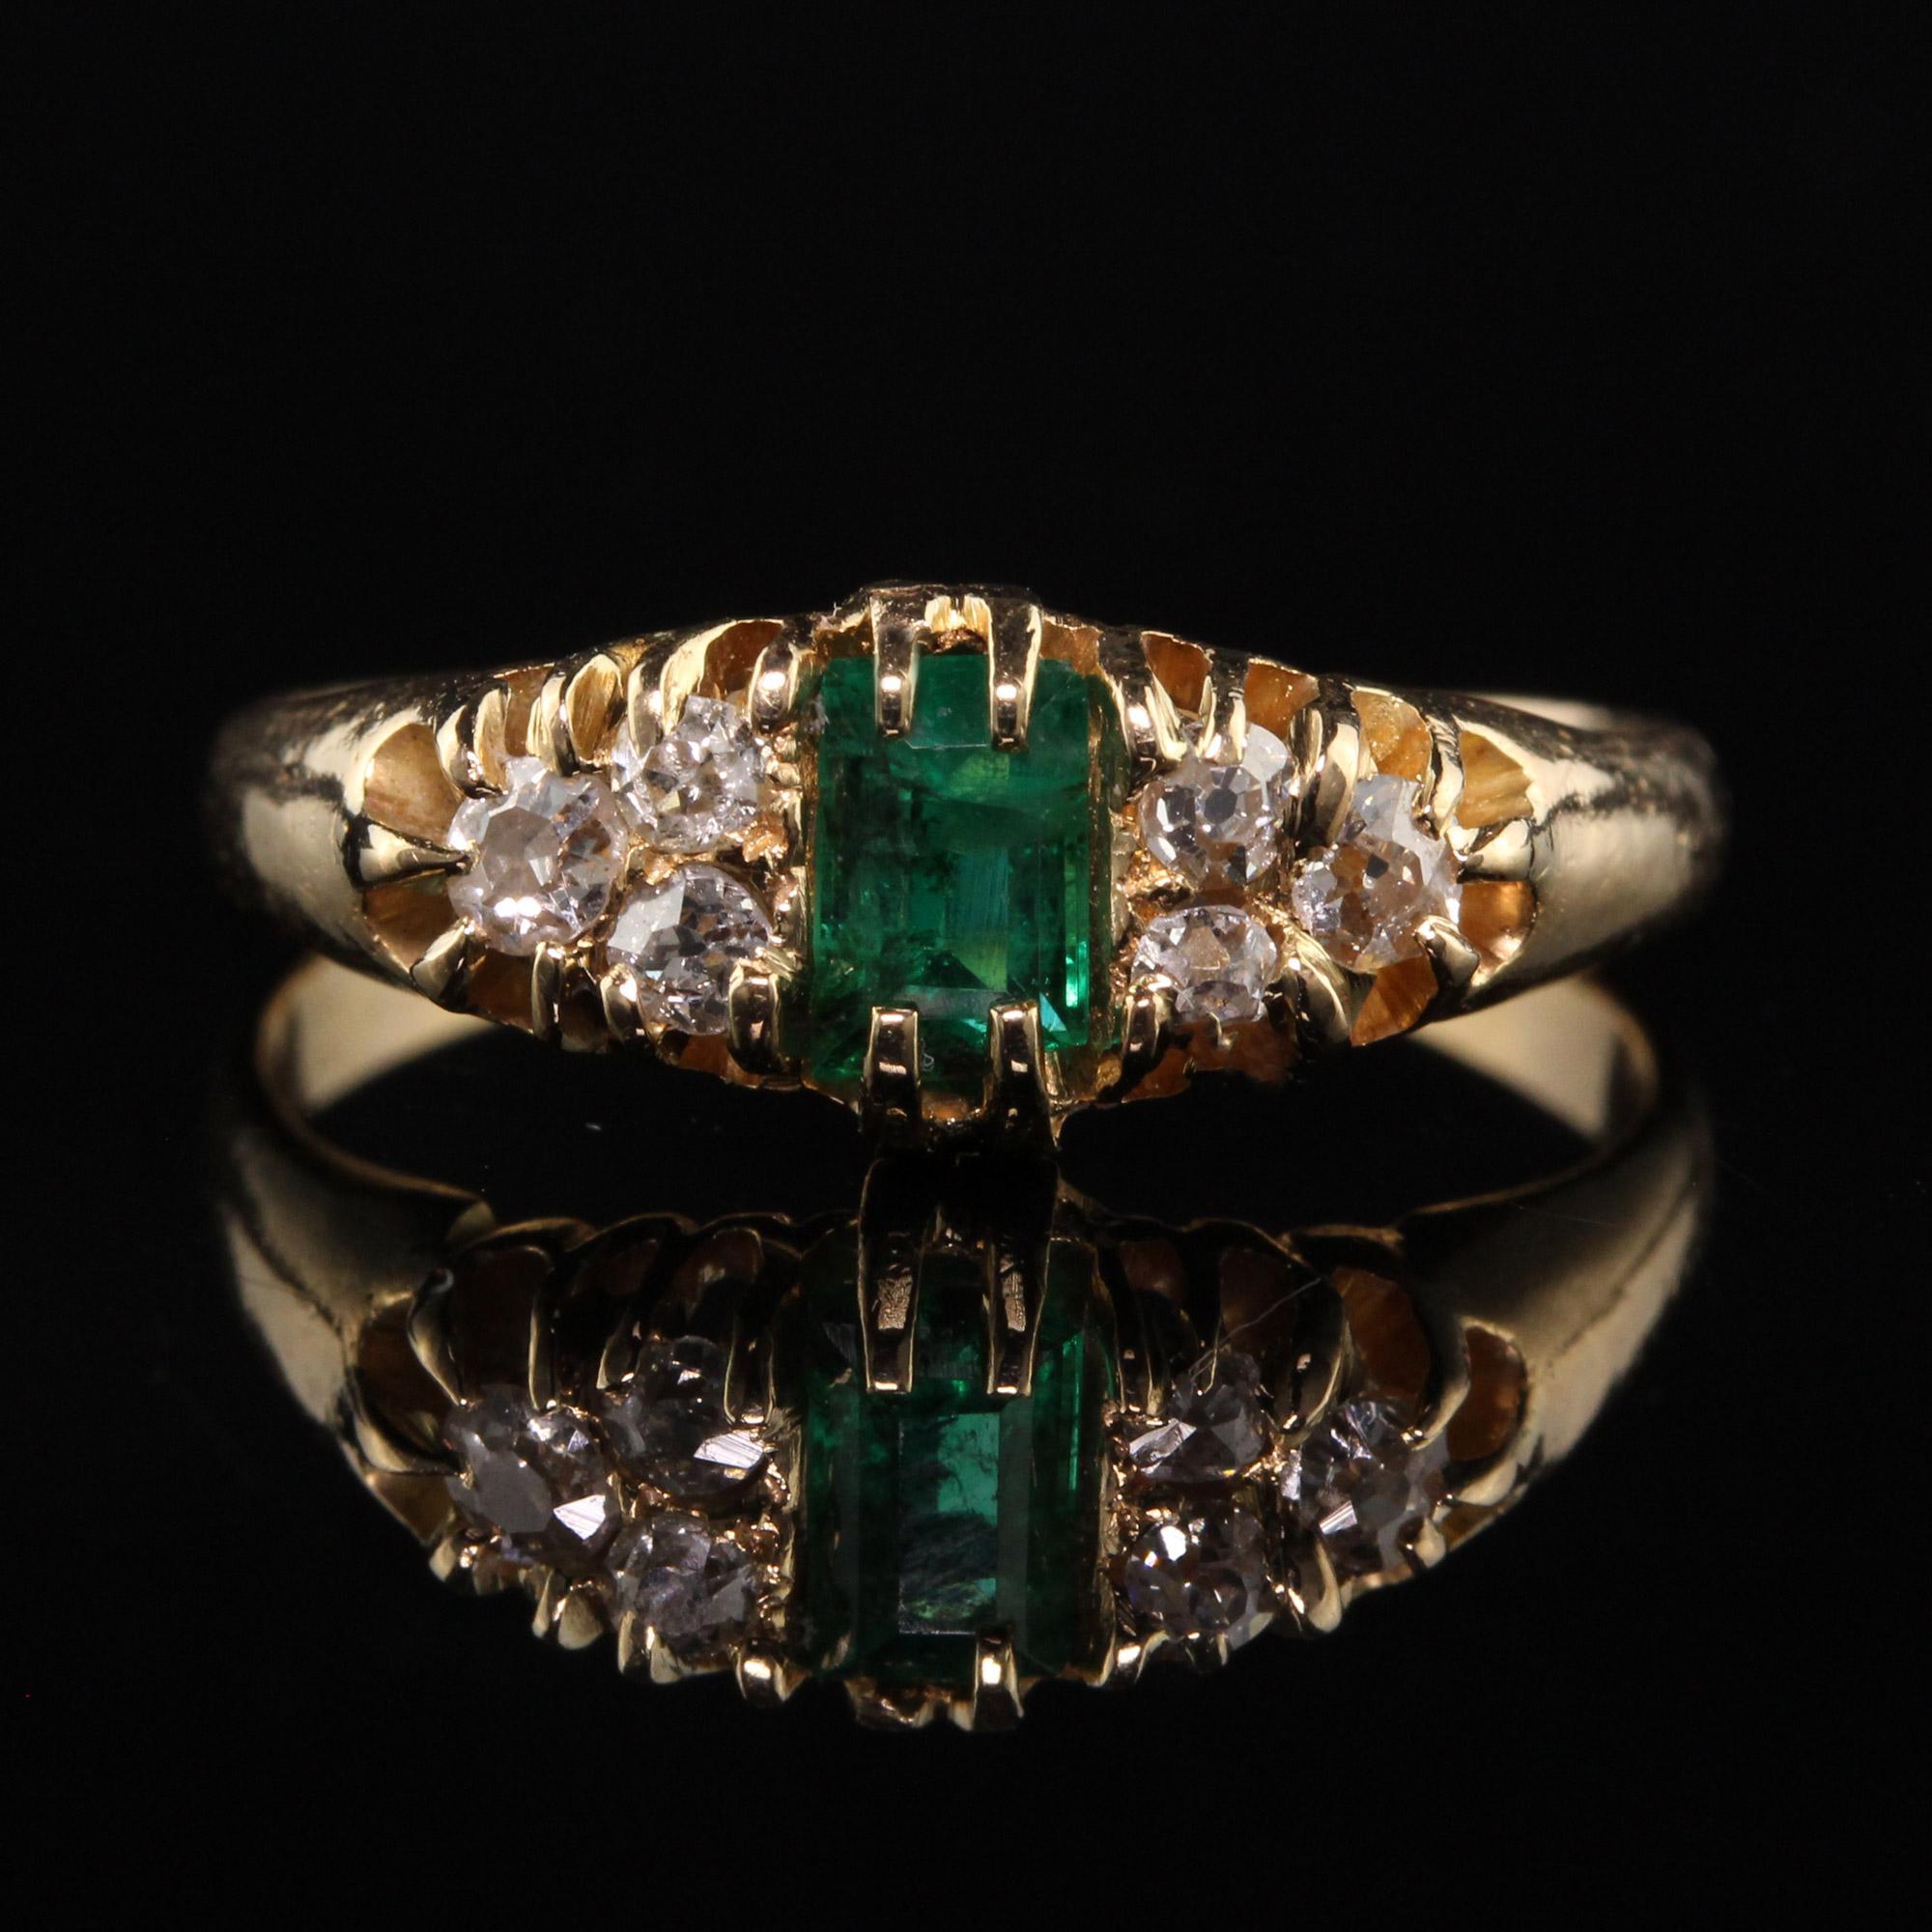 Beautiful Antique Victorian 18K Yellow Gold Old Mine Diamond and Emerald Ring. This beautiful ring is crafted in 18K yellow gold. It features an emerald in the center with 3 old mine cut diamonds on each side. The center emerald has a tiny chip on